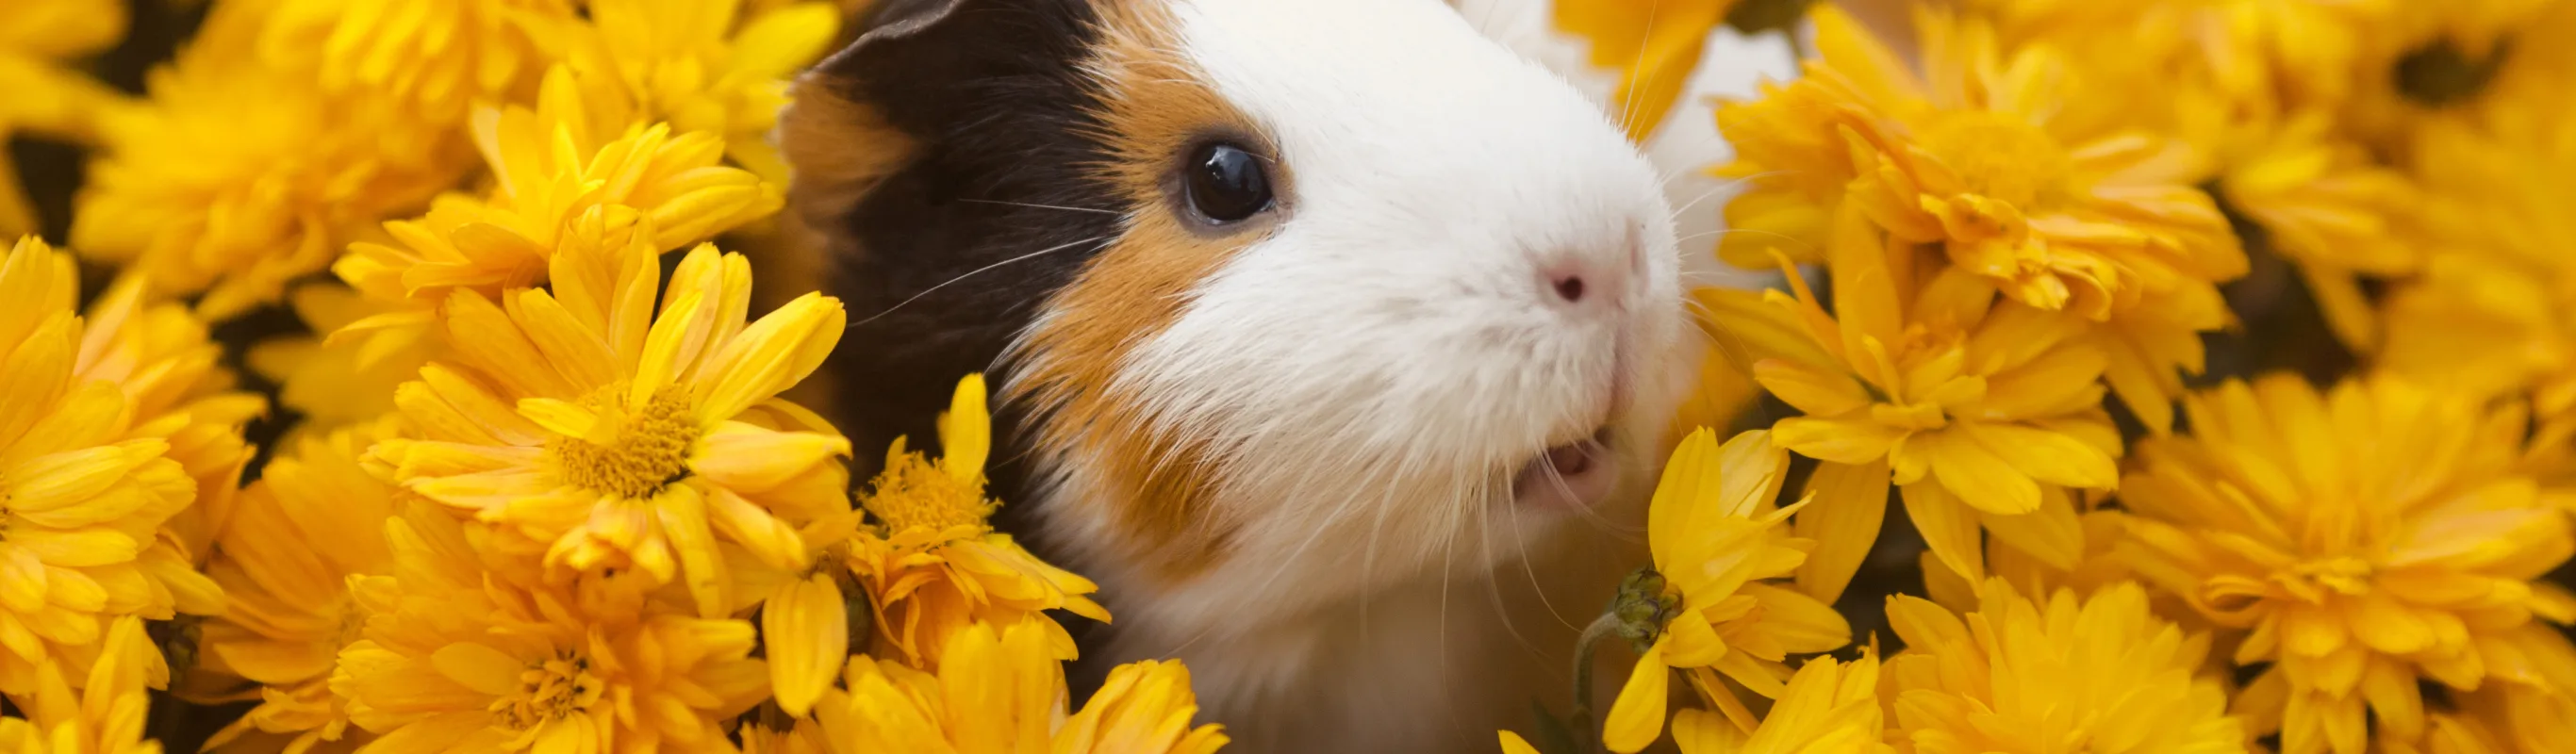  Guinea Pig in yellow flowers.